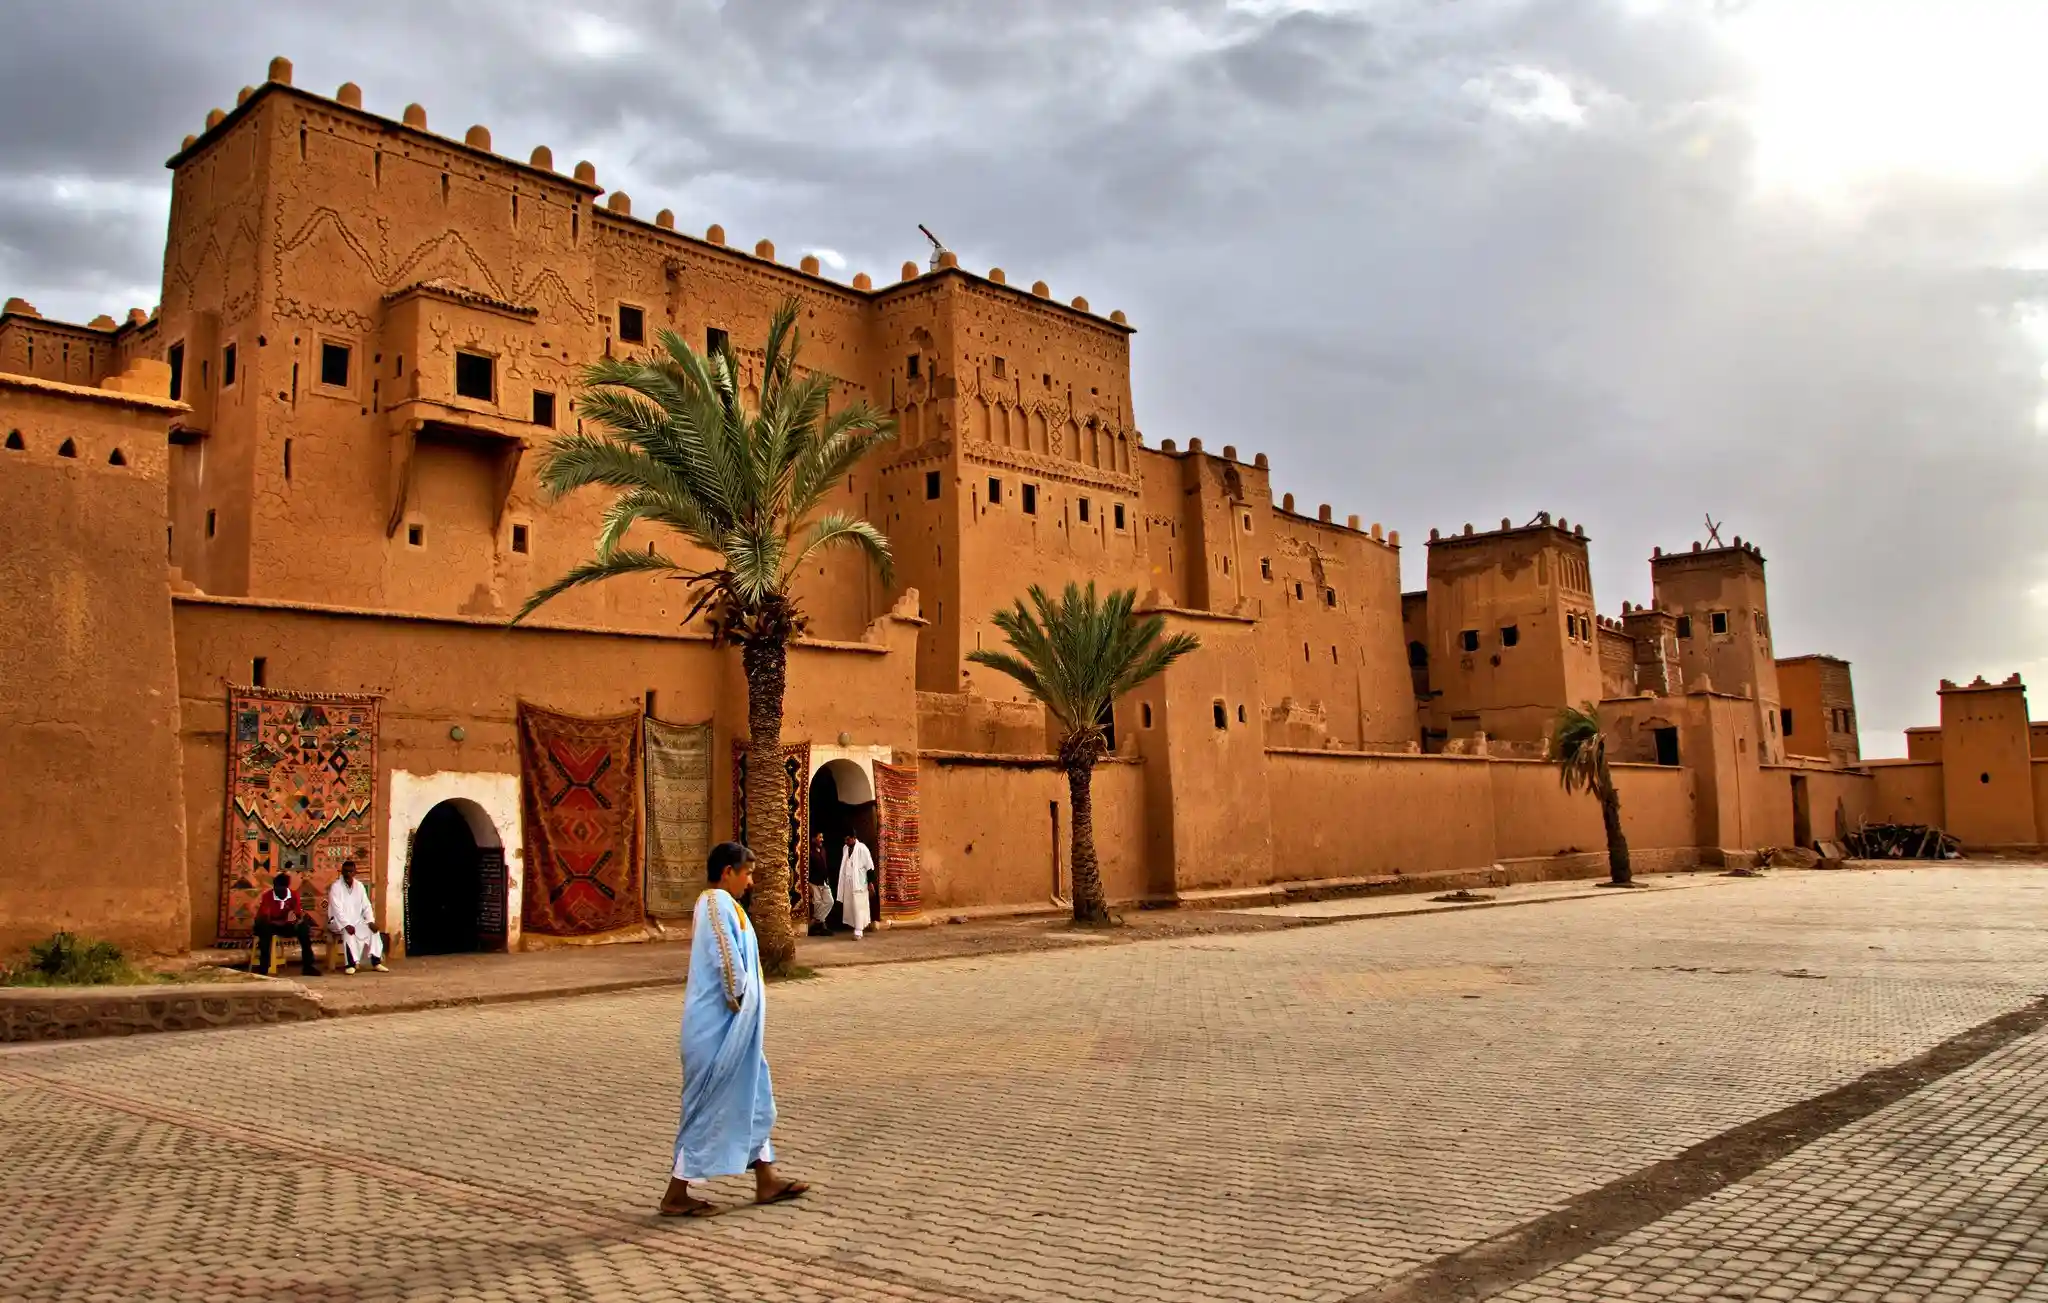 Unforgettable Mementos: What to Bring Back from Morocco?